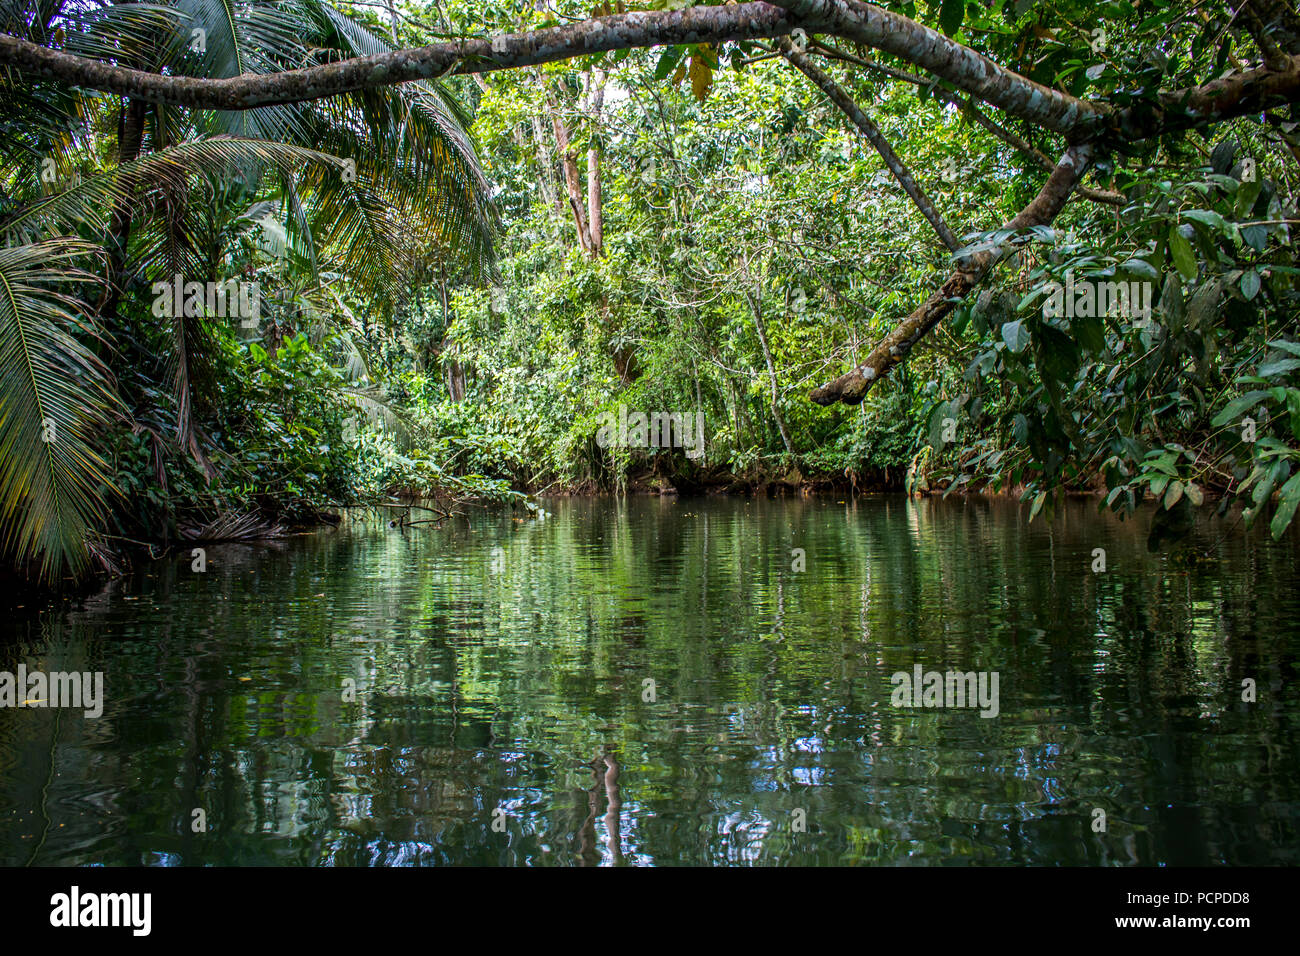 Jungle canal with reflections of green plants in water Stock Photo